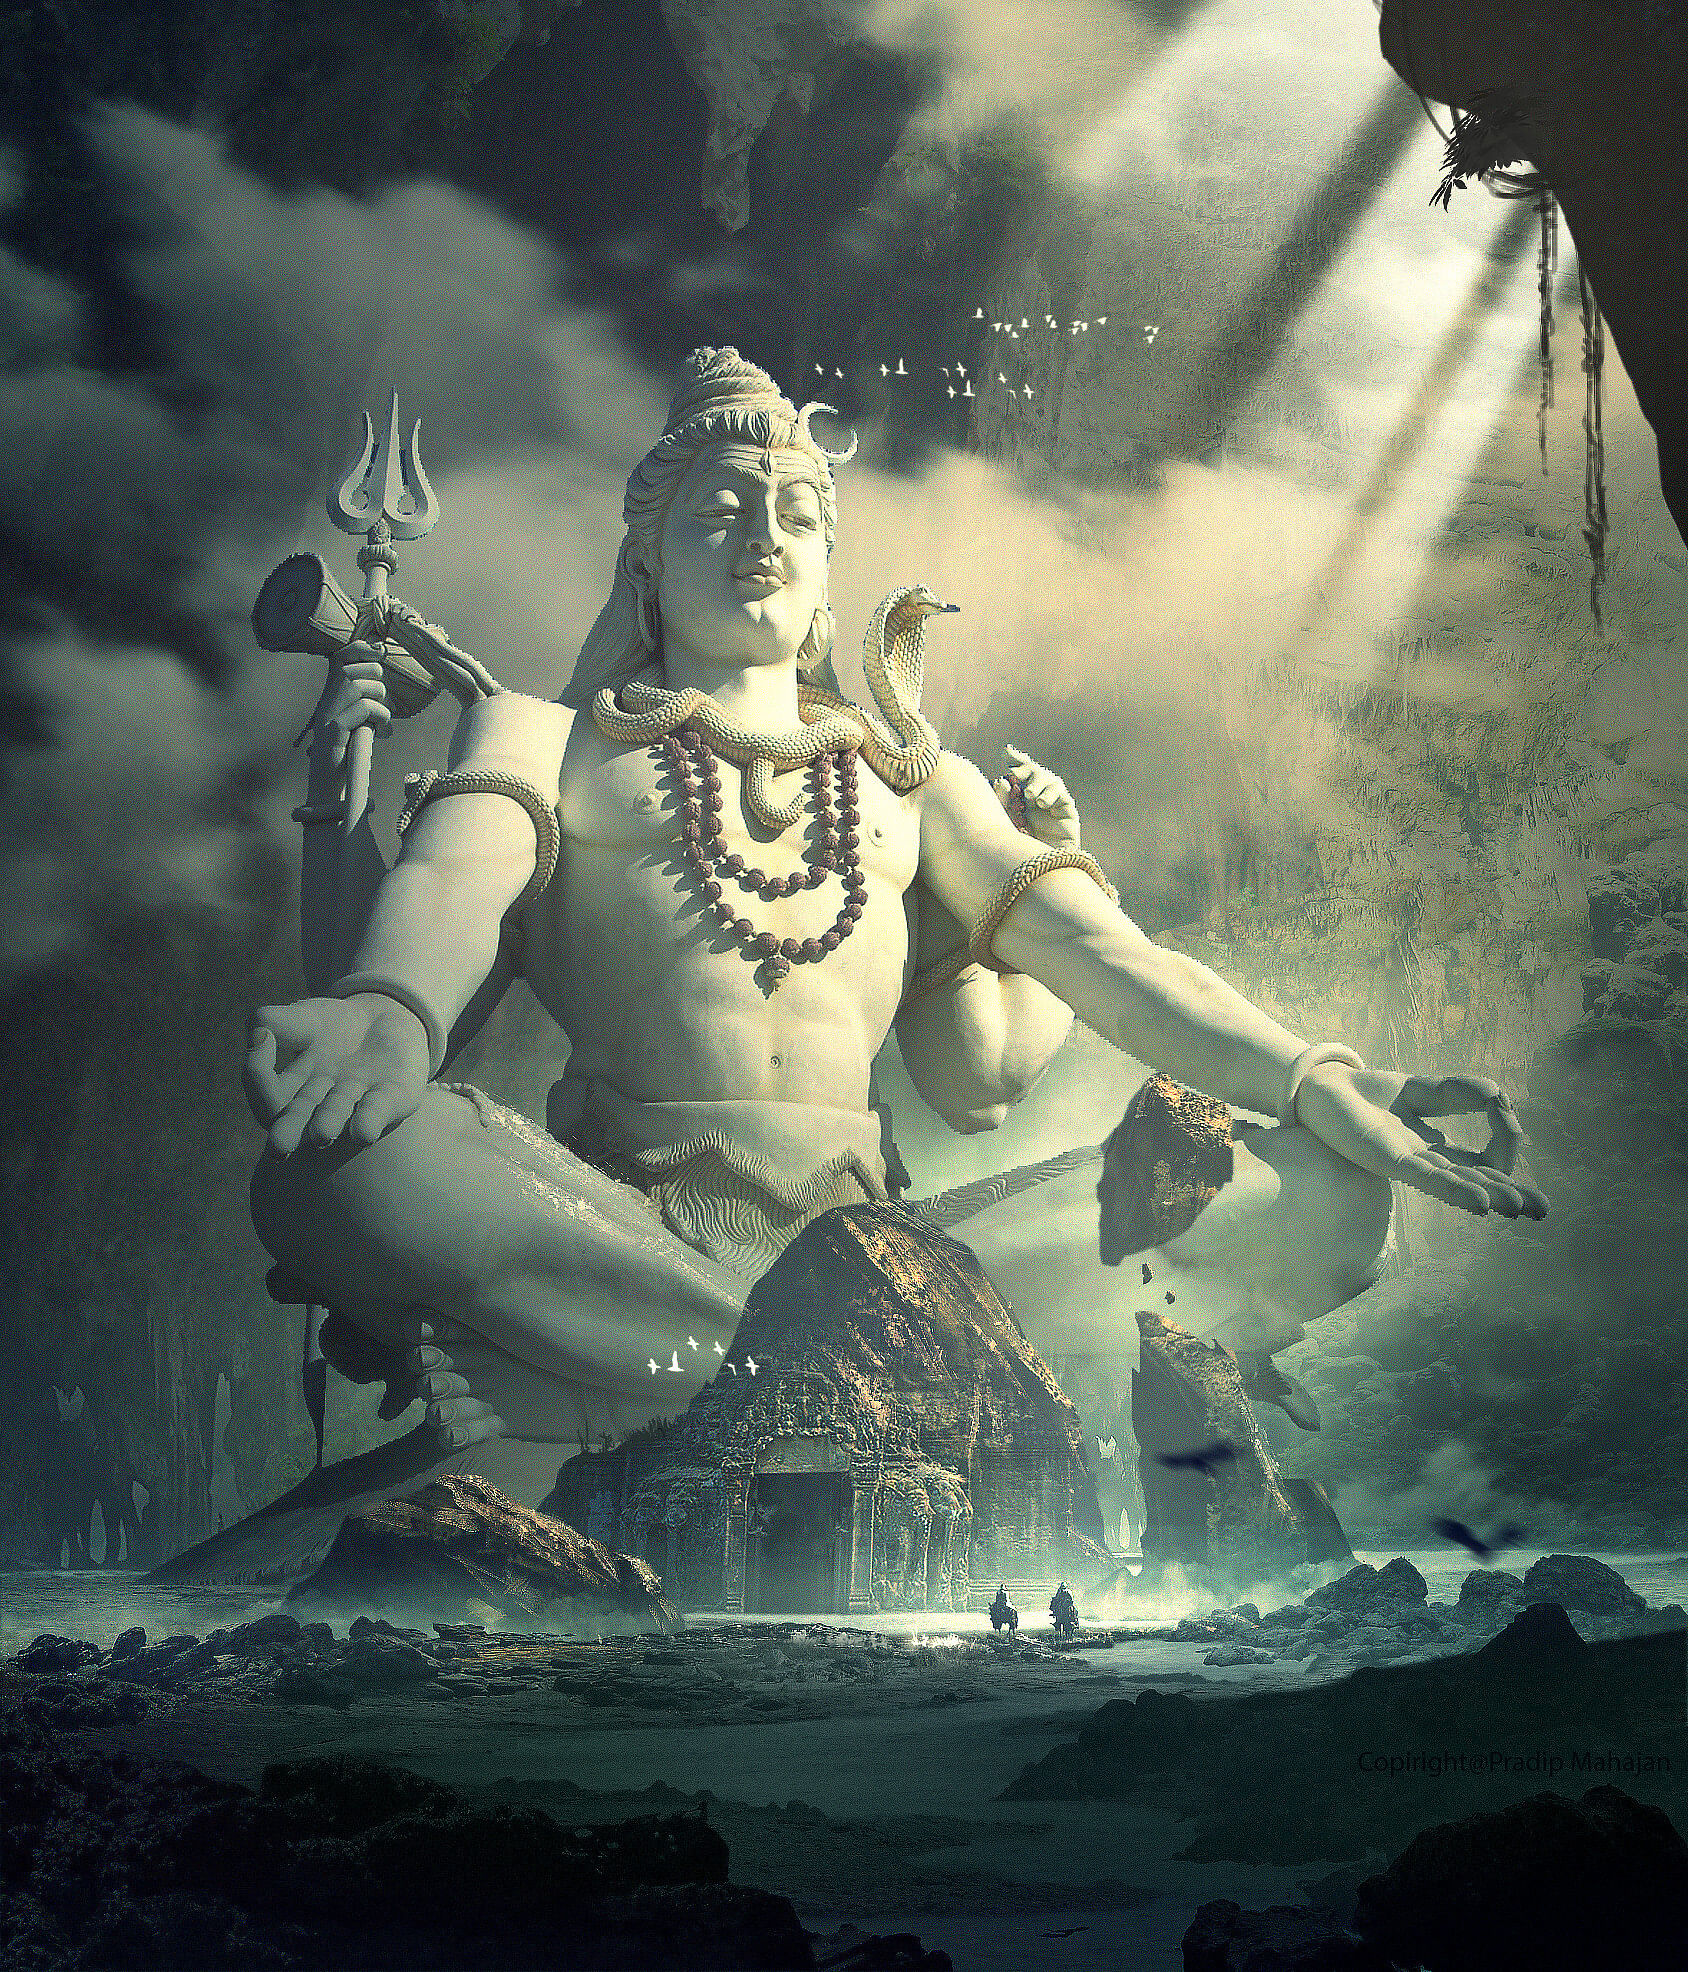 Sawan 2022: The month of Sawan has started, worship lord shiva in this way during the fast on Monday